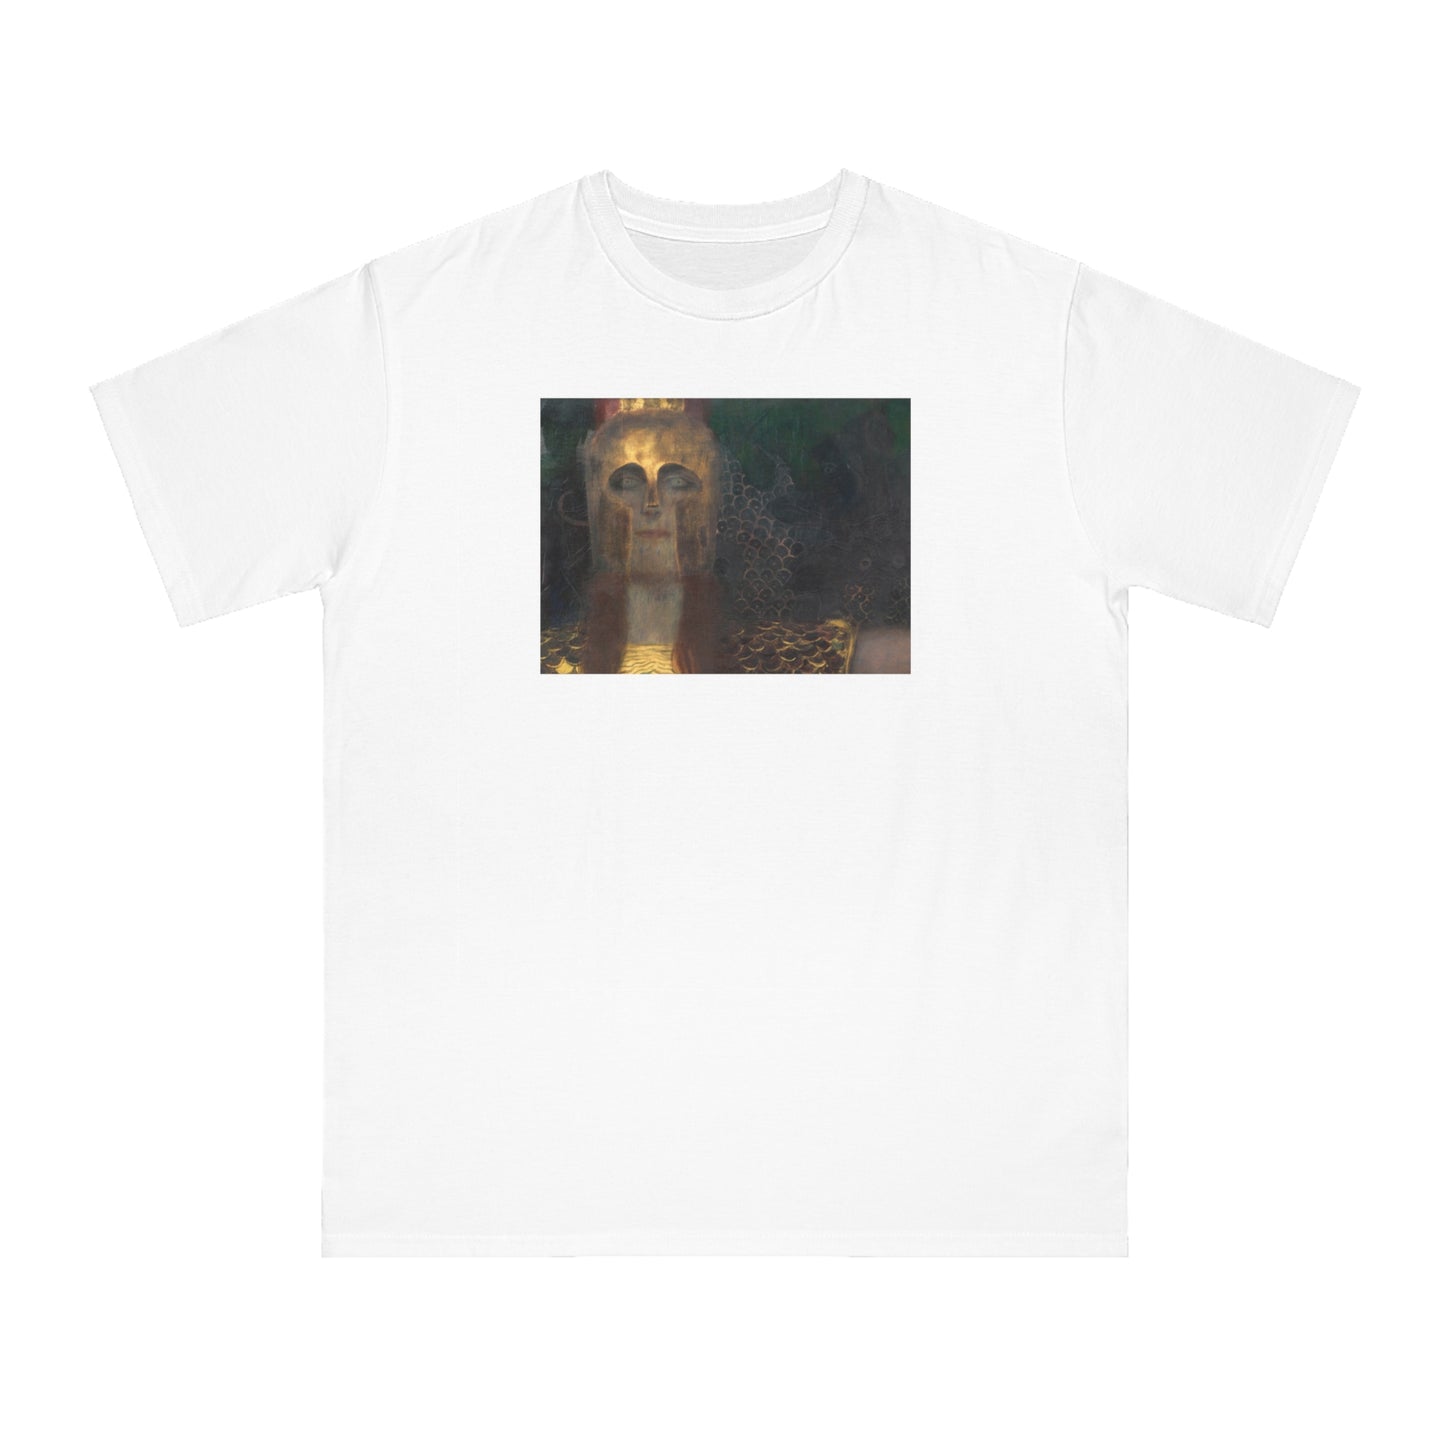 a white t - shirt with a picture of a dog on it